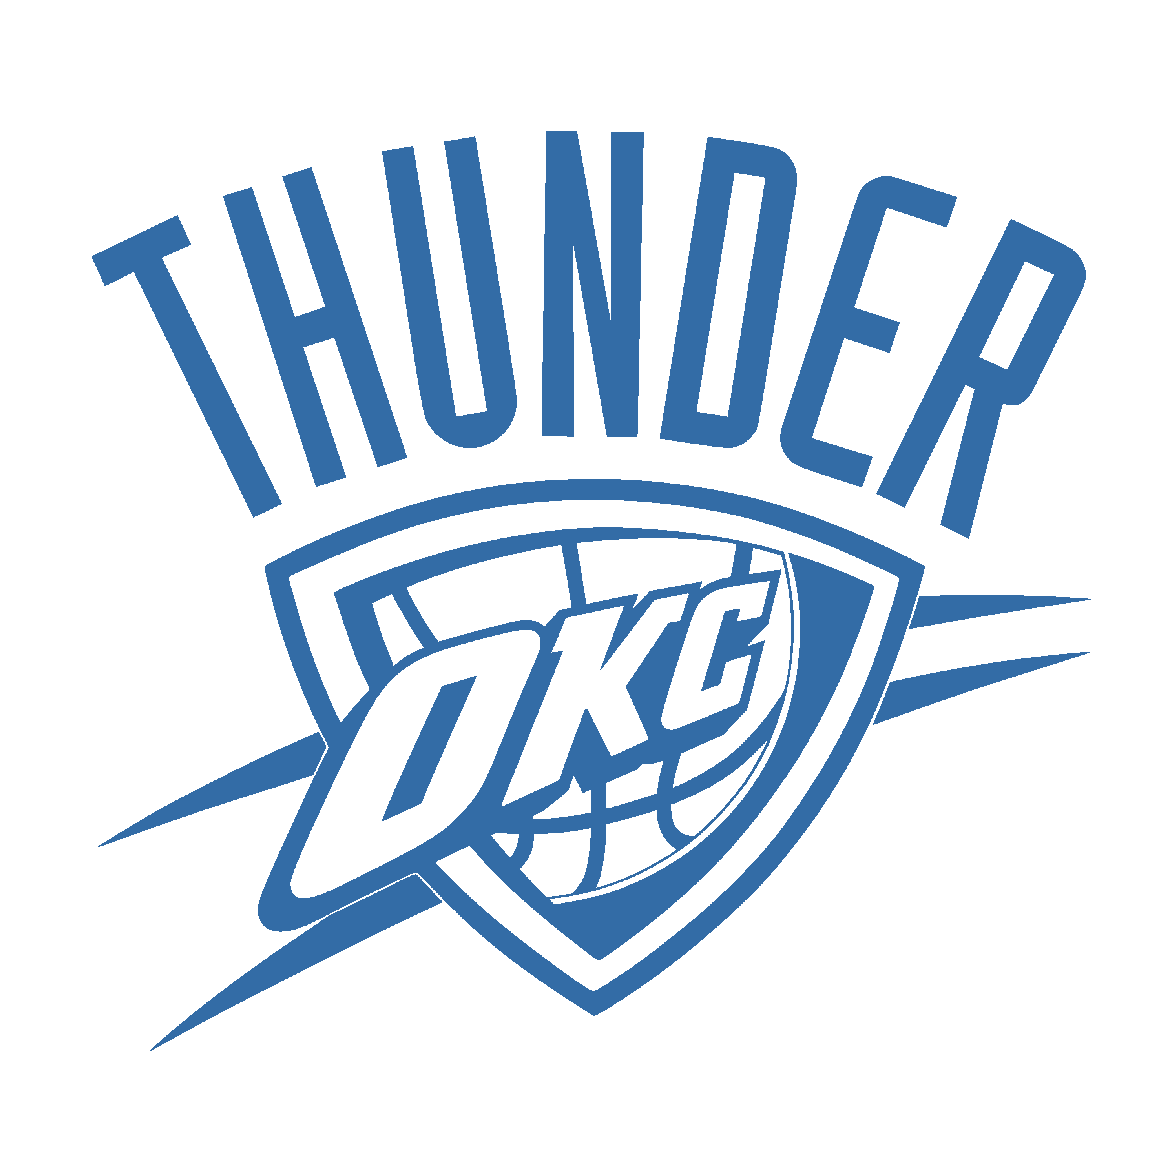 Oklahoma City Thunder Blue Logo PNG Image in Transparent